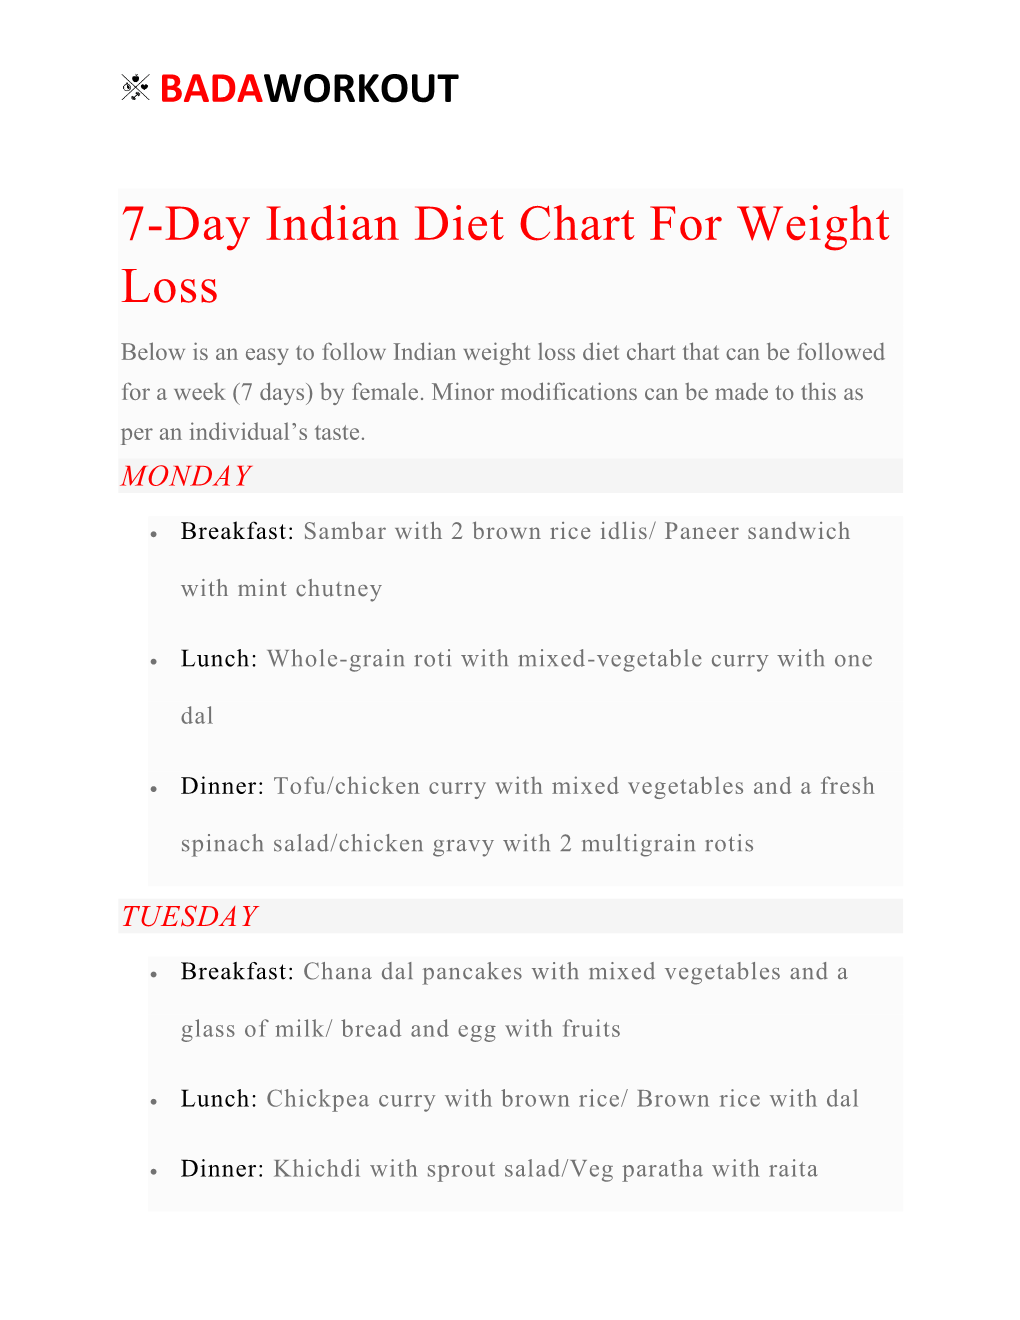 7-Day Indian Diet Chart for Weight Loss